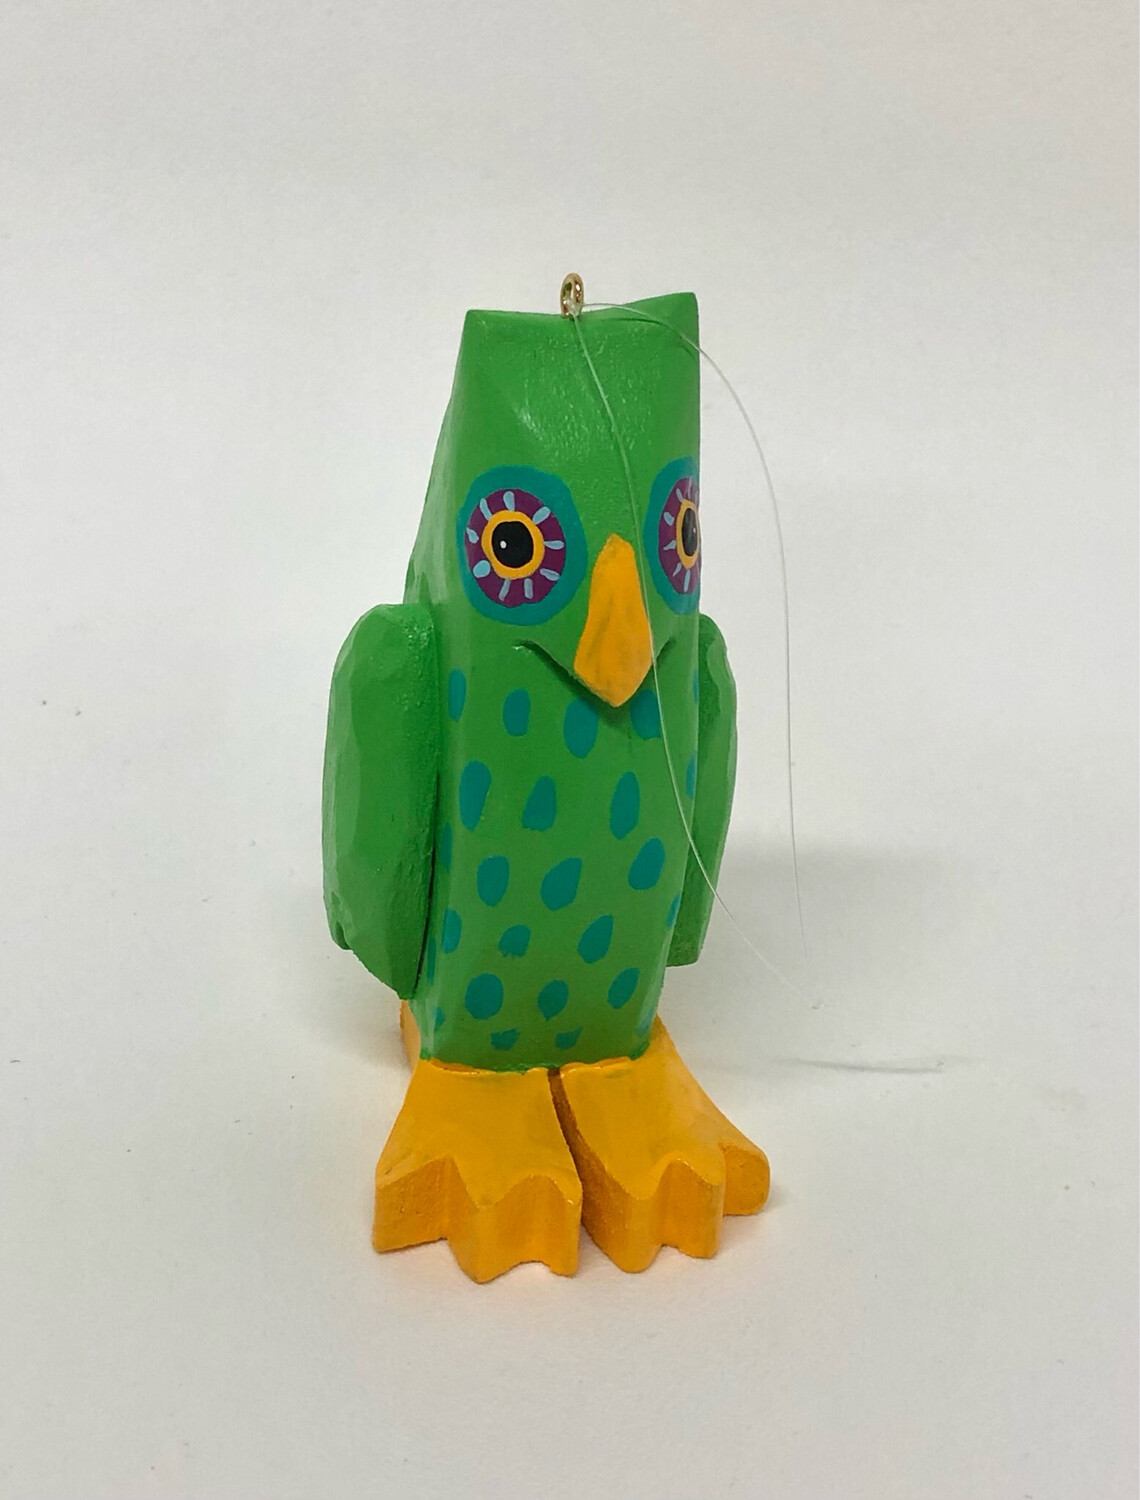 Green Owl Ornament Timberdoodle